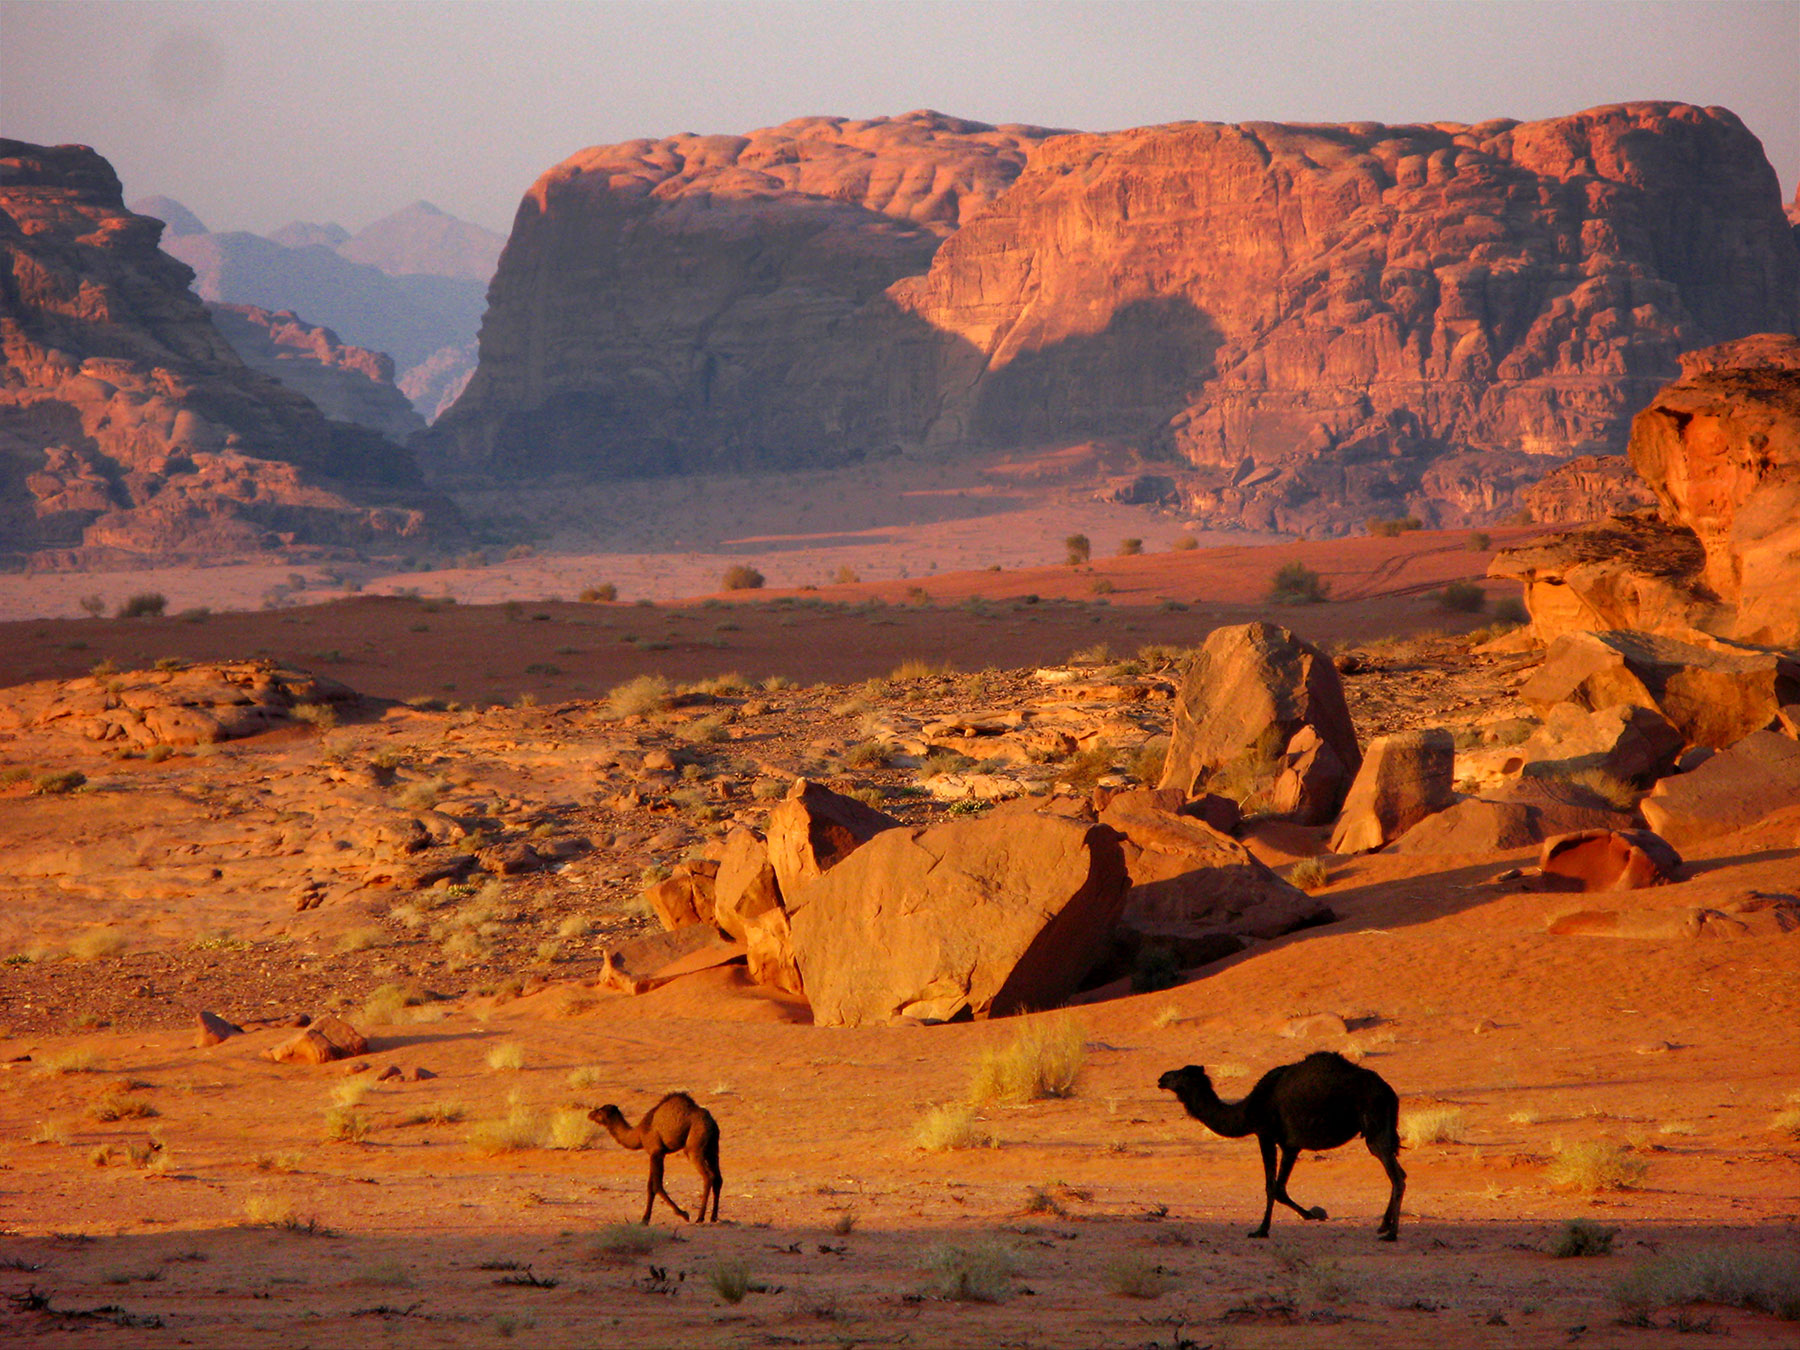 Ride a camel in Wadi Rum